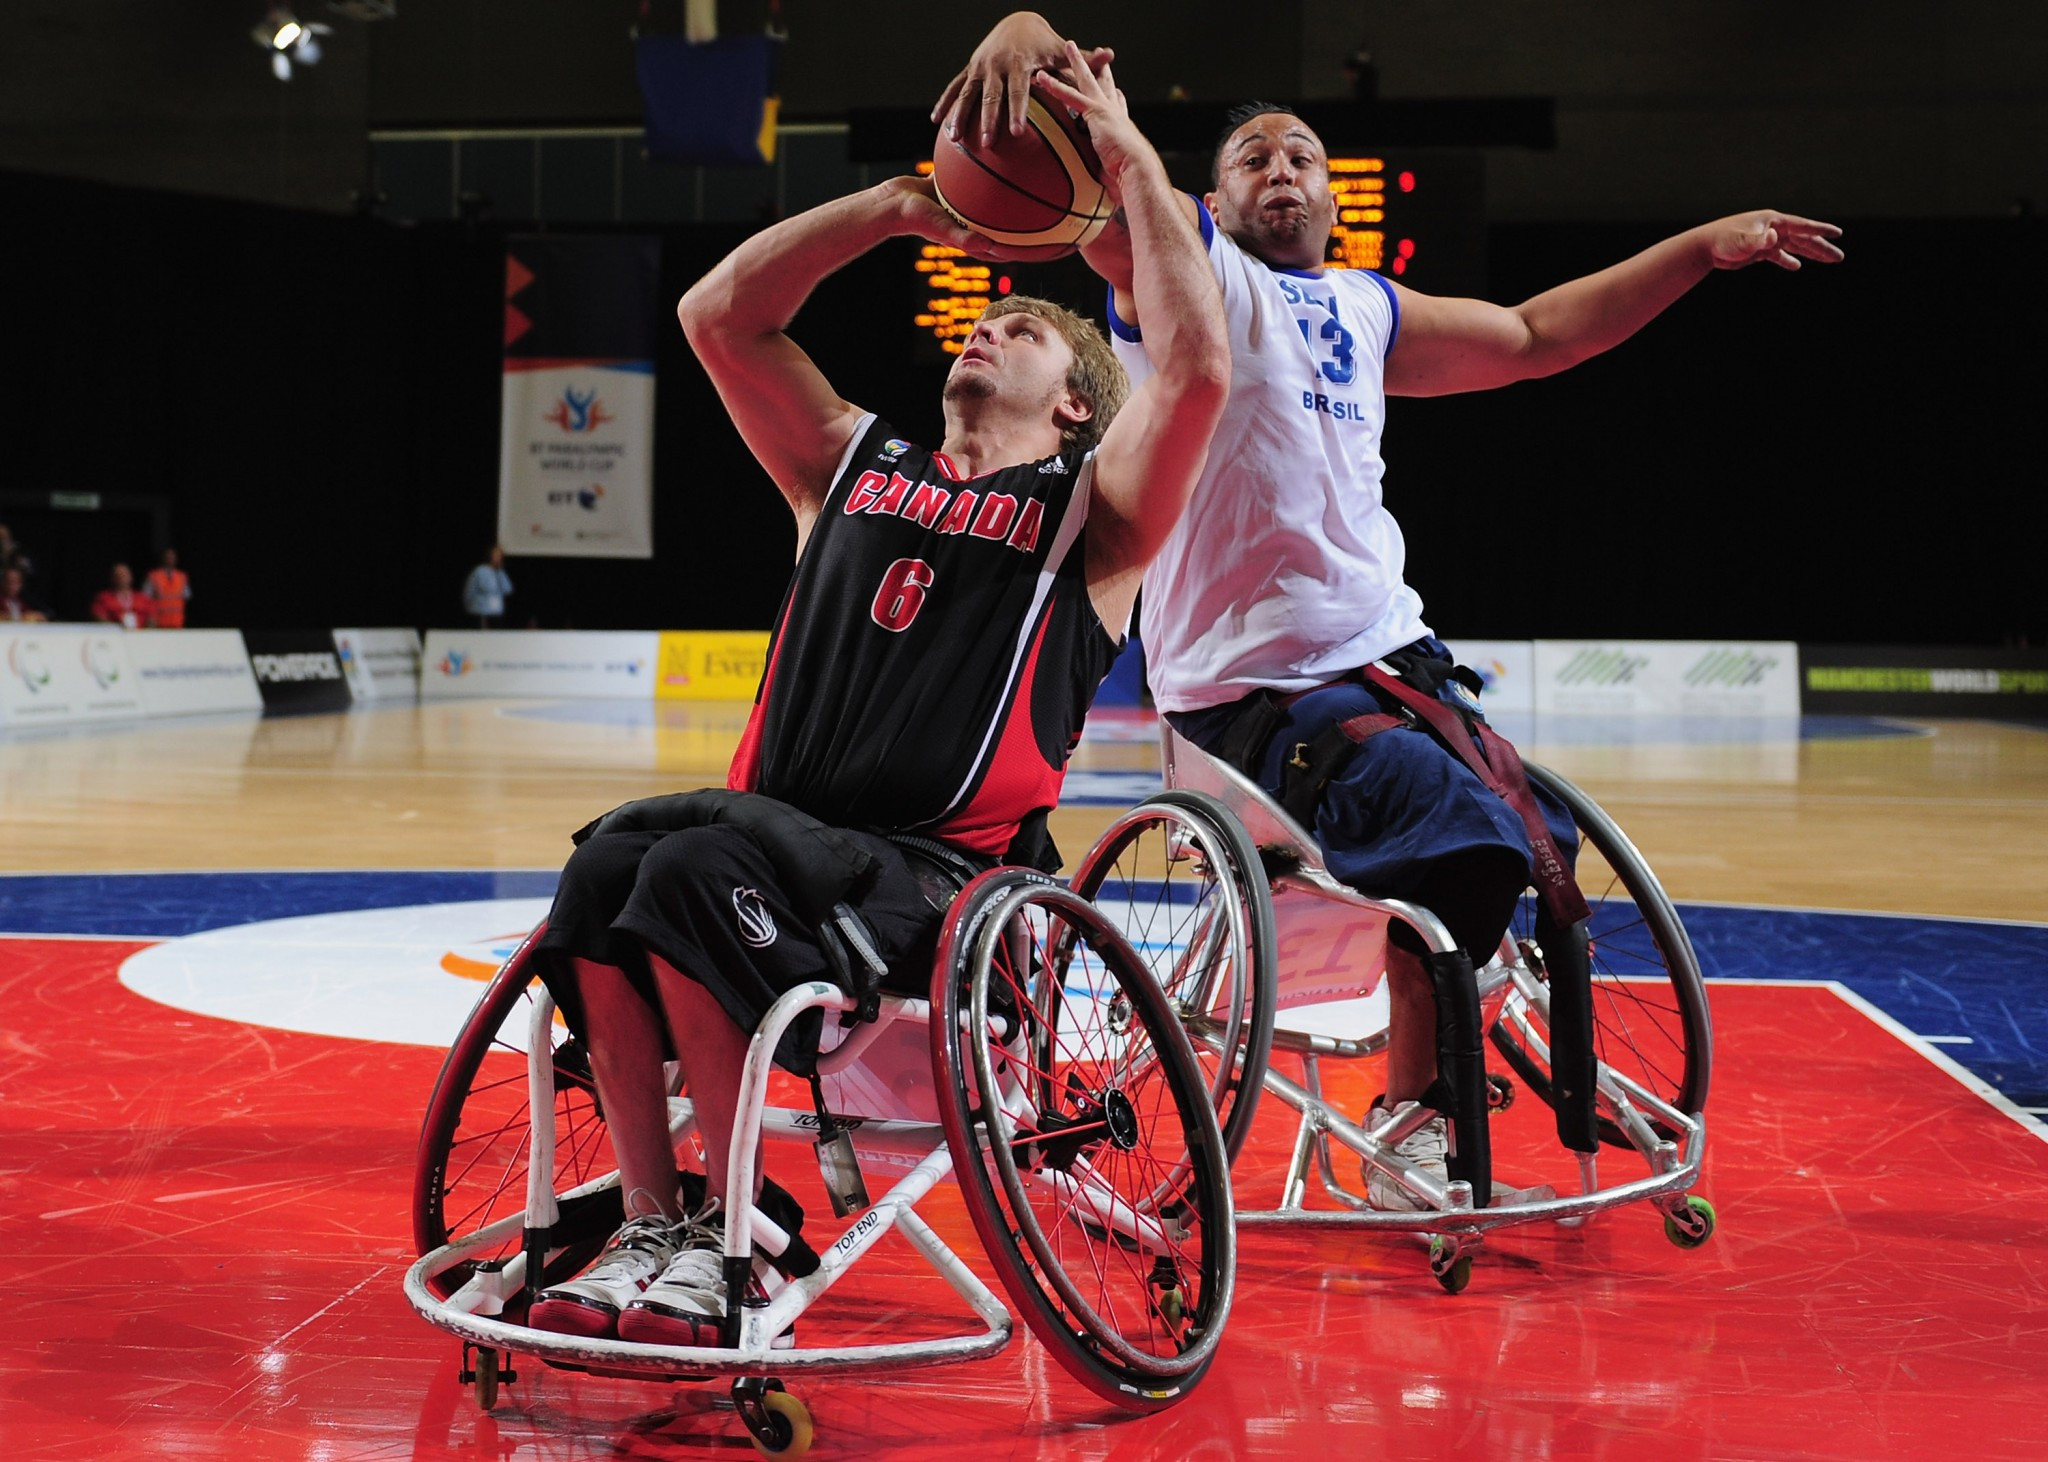 Hedges says Canada are focused on qualifying for IWBF World Championships